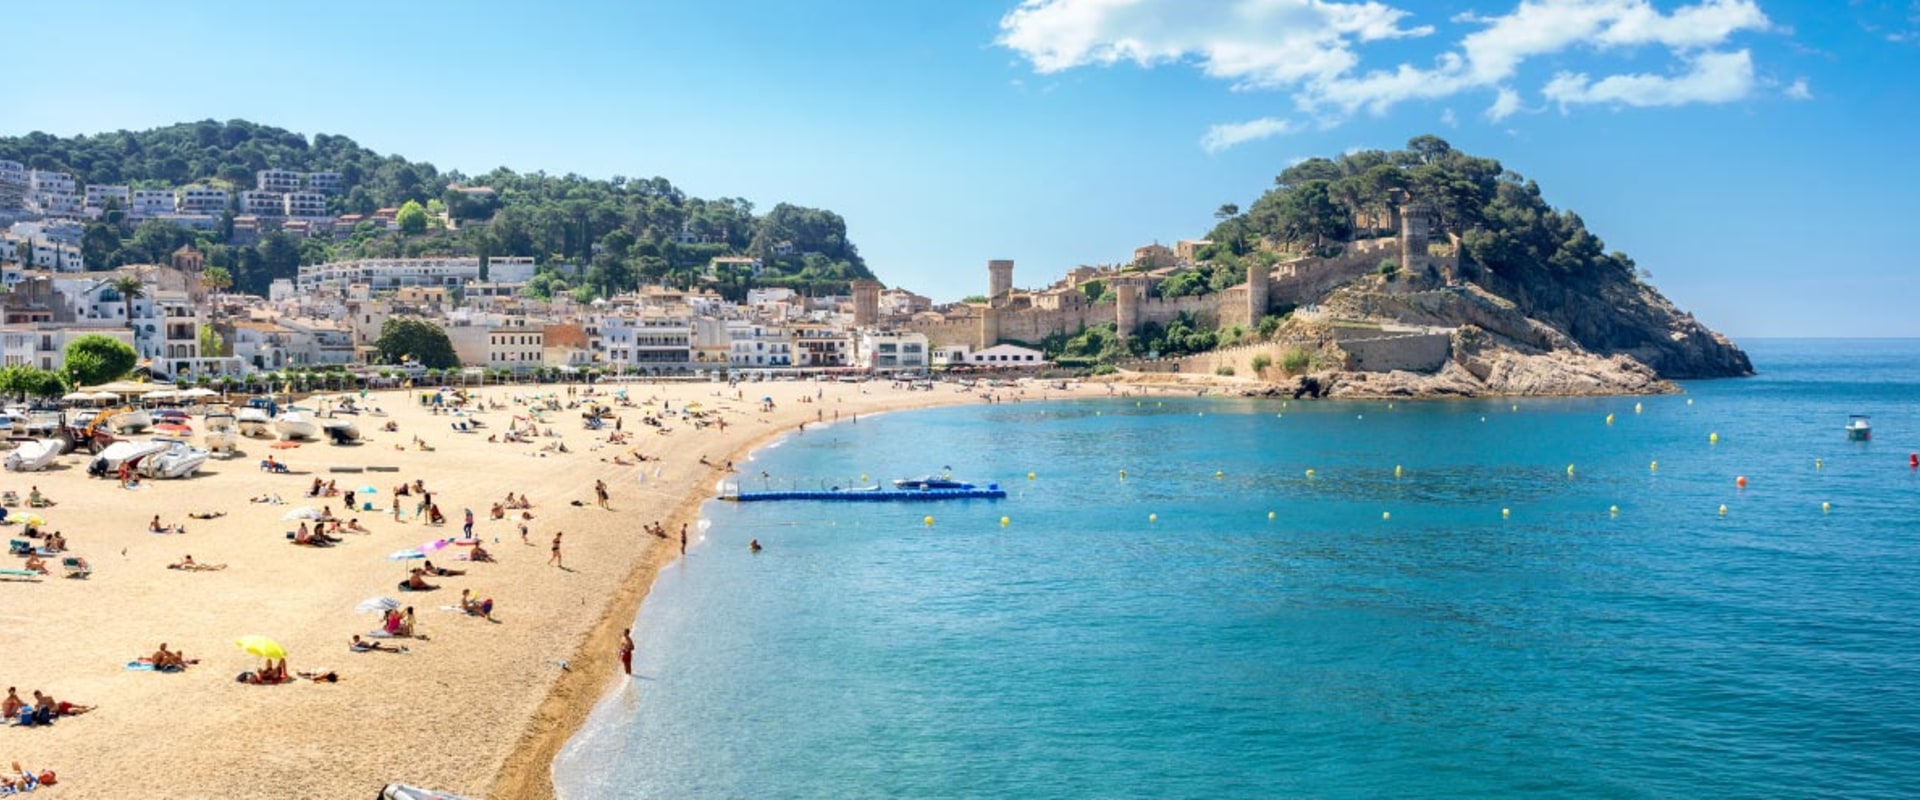 Tourist attractions in spain beaches?